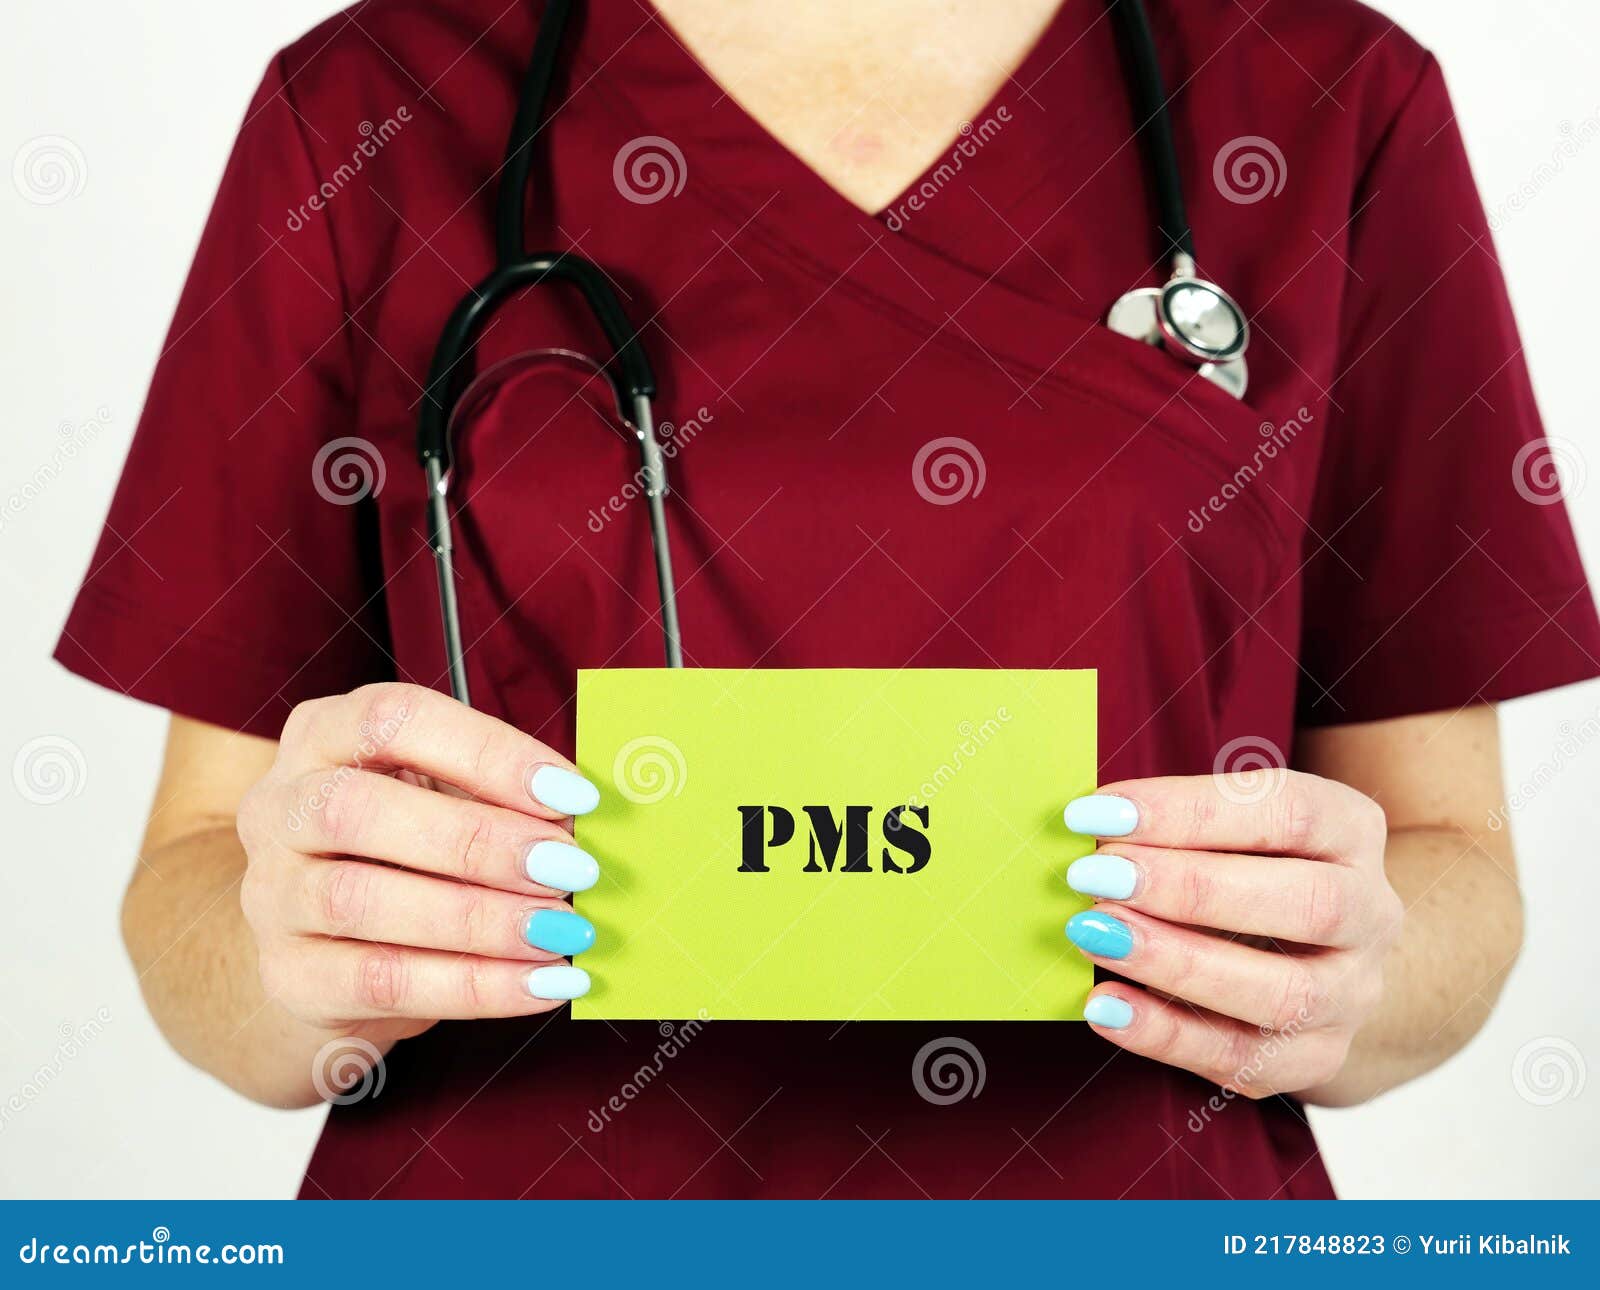 Pms meaning